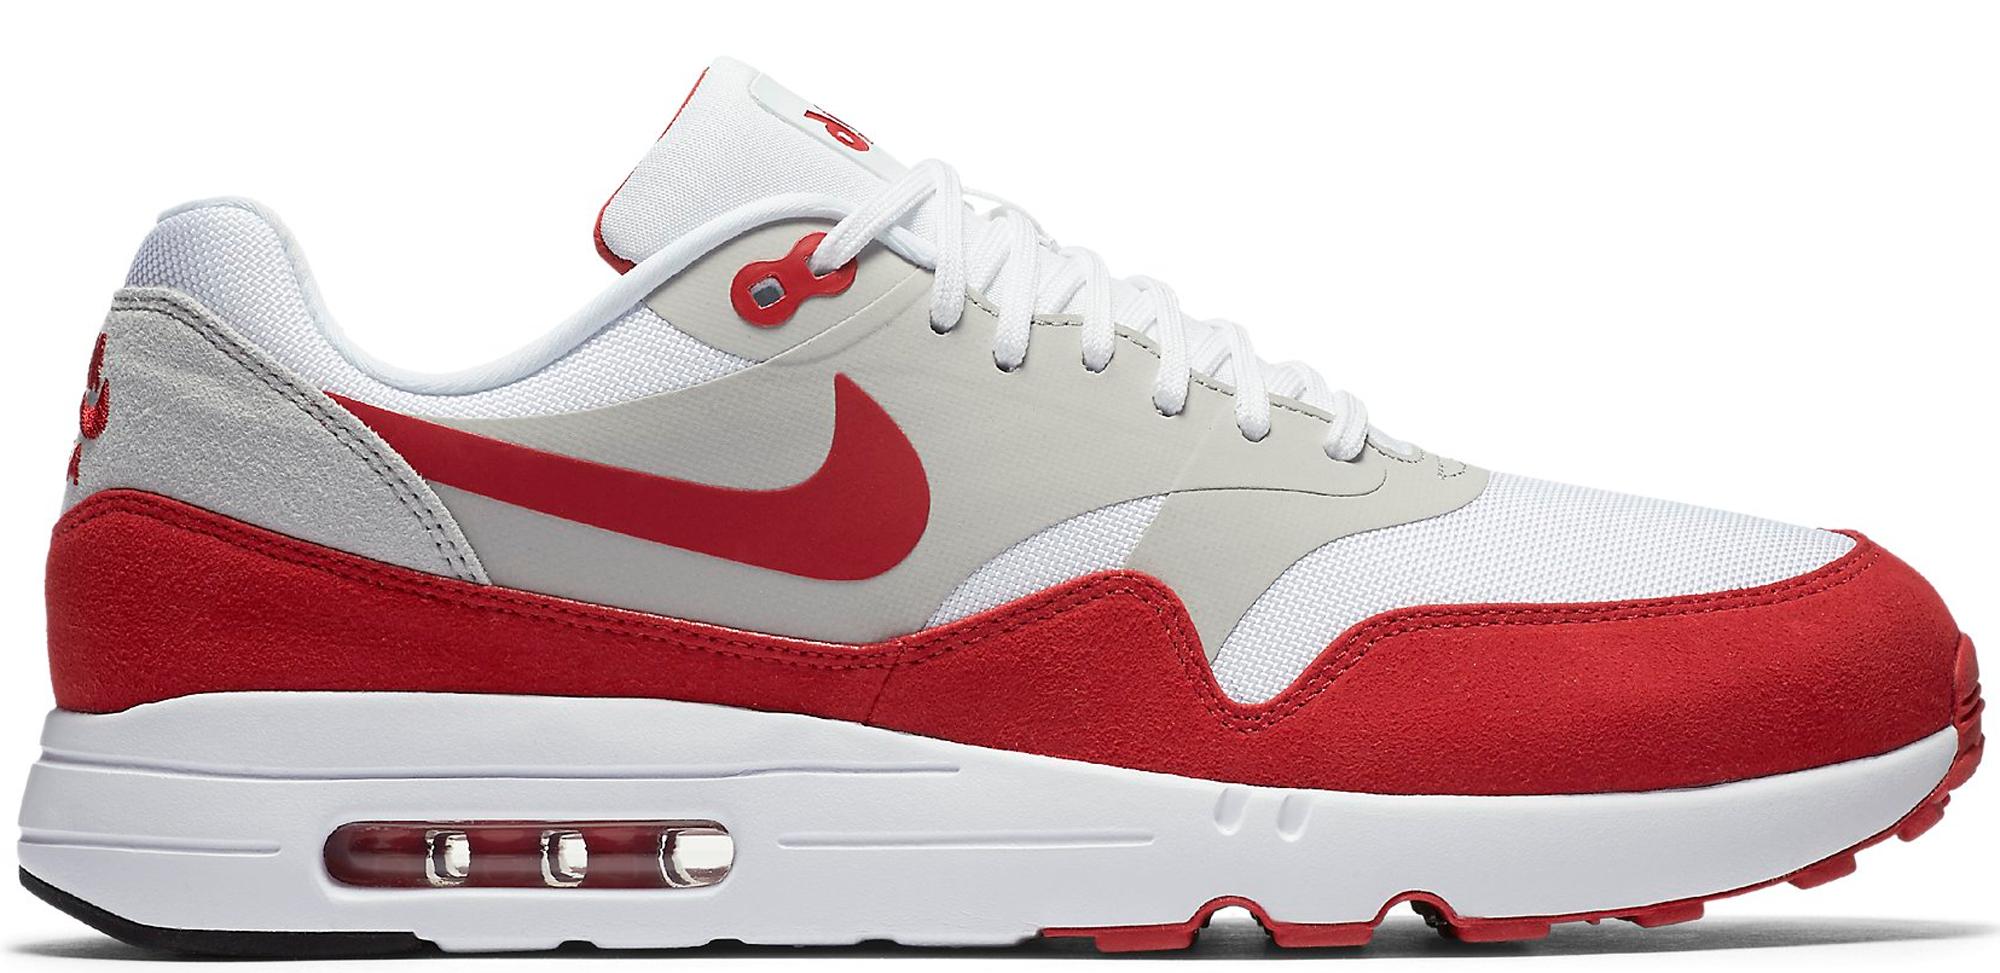 Nike Air Max 1 Ultra 2.0 University Red - StockX News